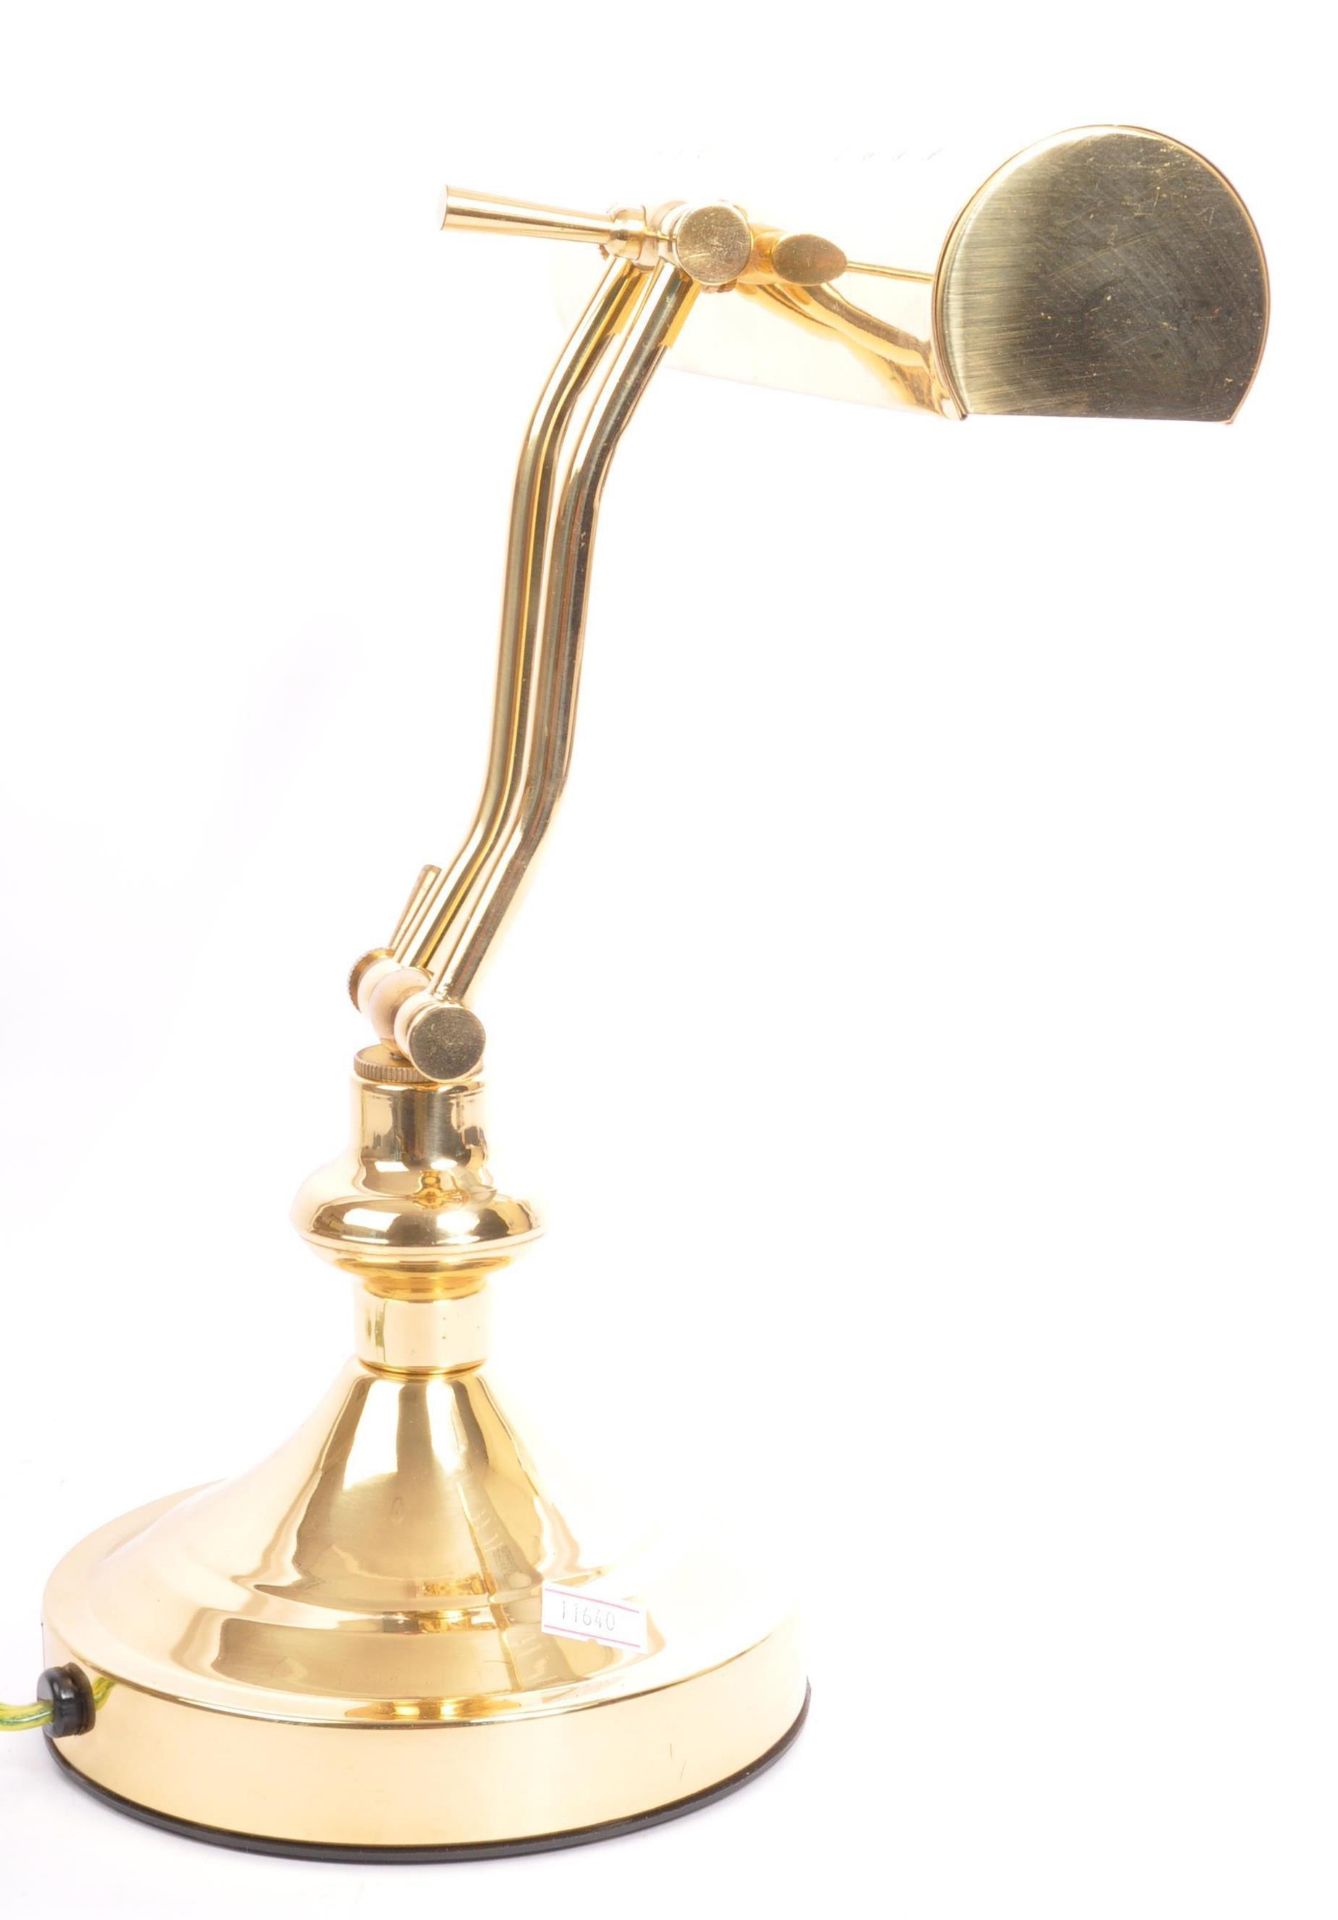 20TH CENTURY BANKERS DESK OFFICE LAMP - Image 4 of 5